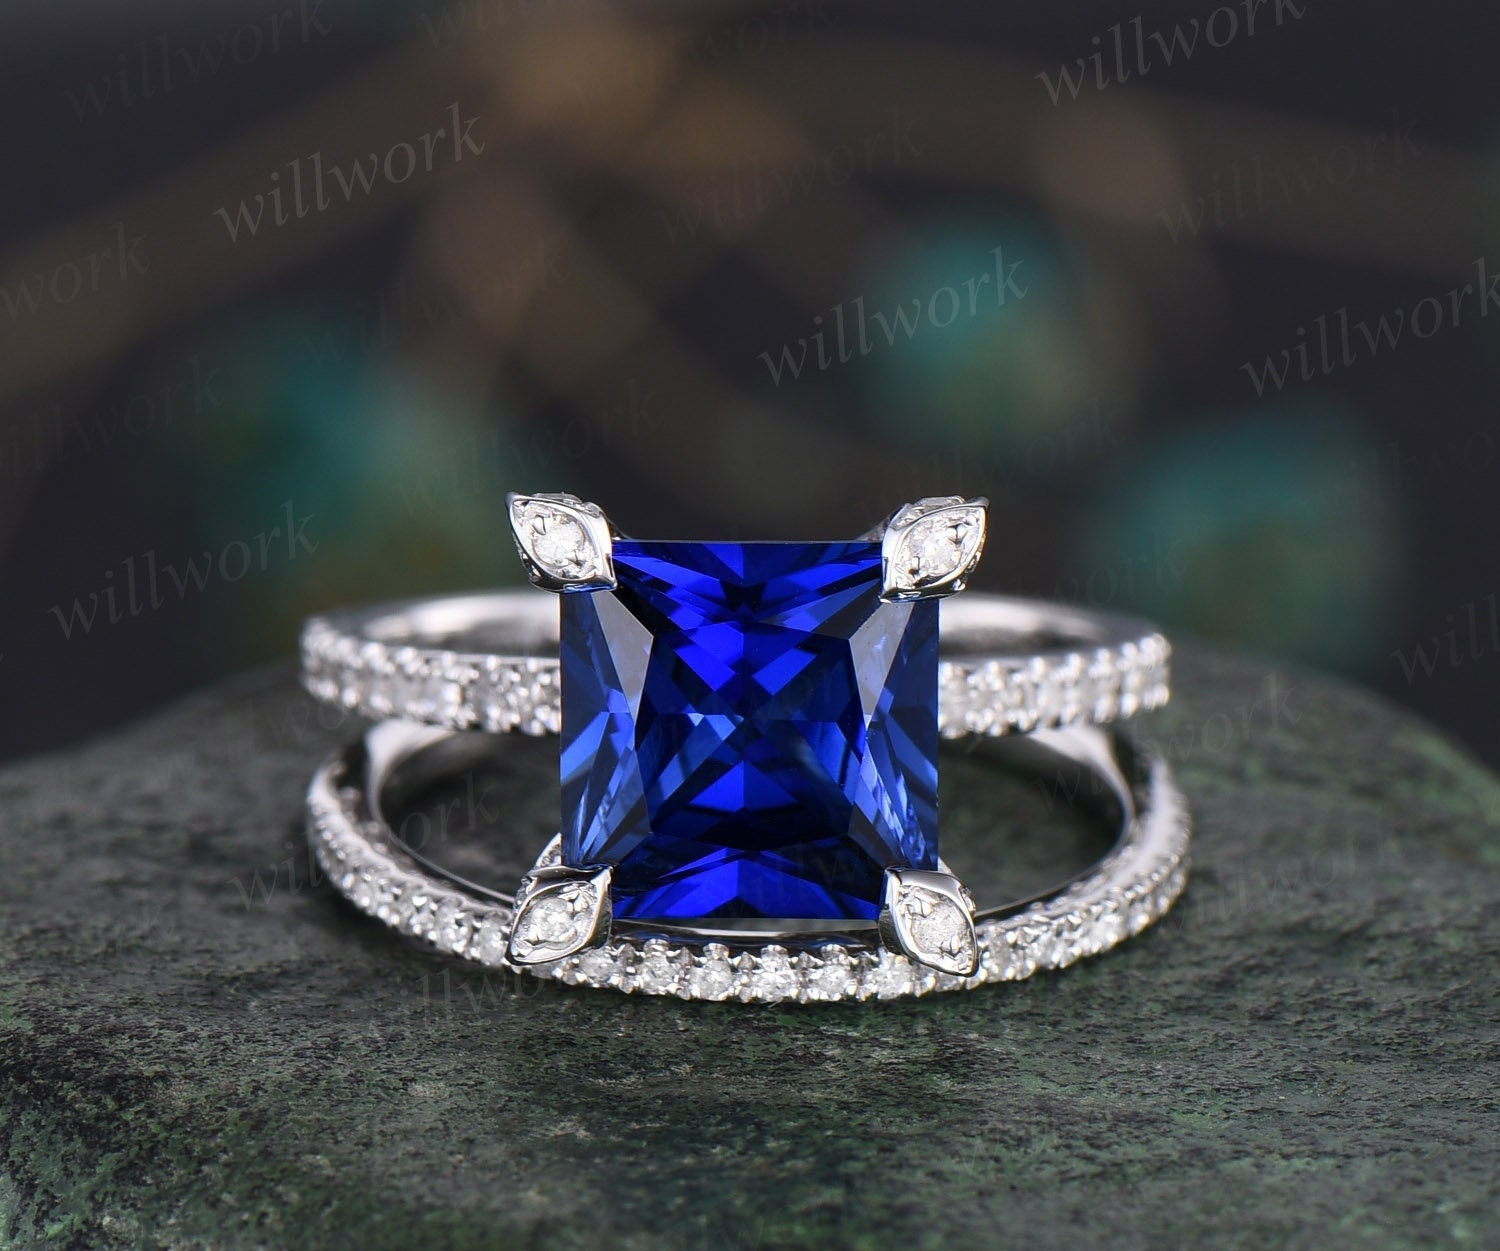 7.2ctw Princess Cut Sapphire Ring Blue Sapphire Engagement Ring 3 Stones Princess  Ring Gemstone Ring September Birthstone Sterling Silver - Etsy